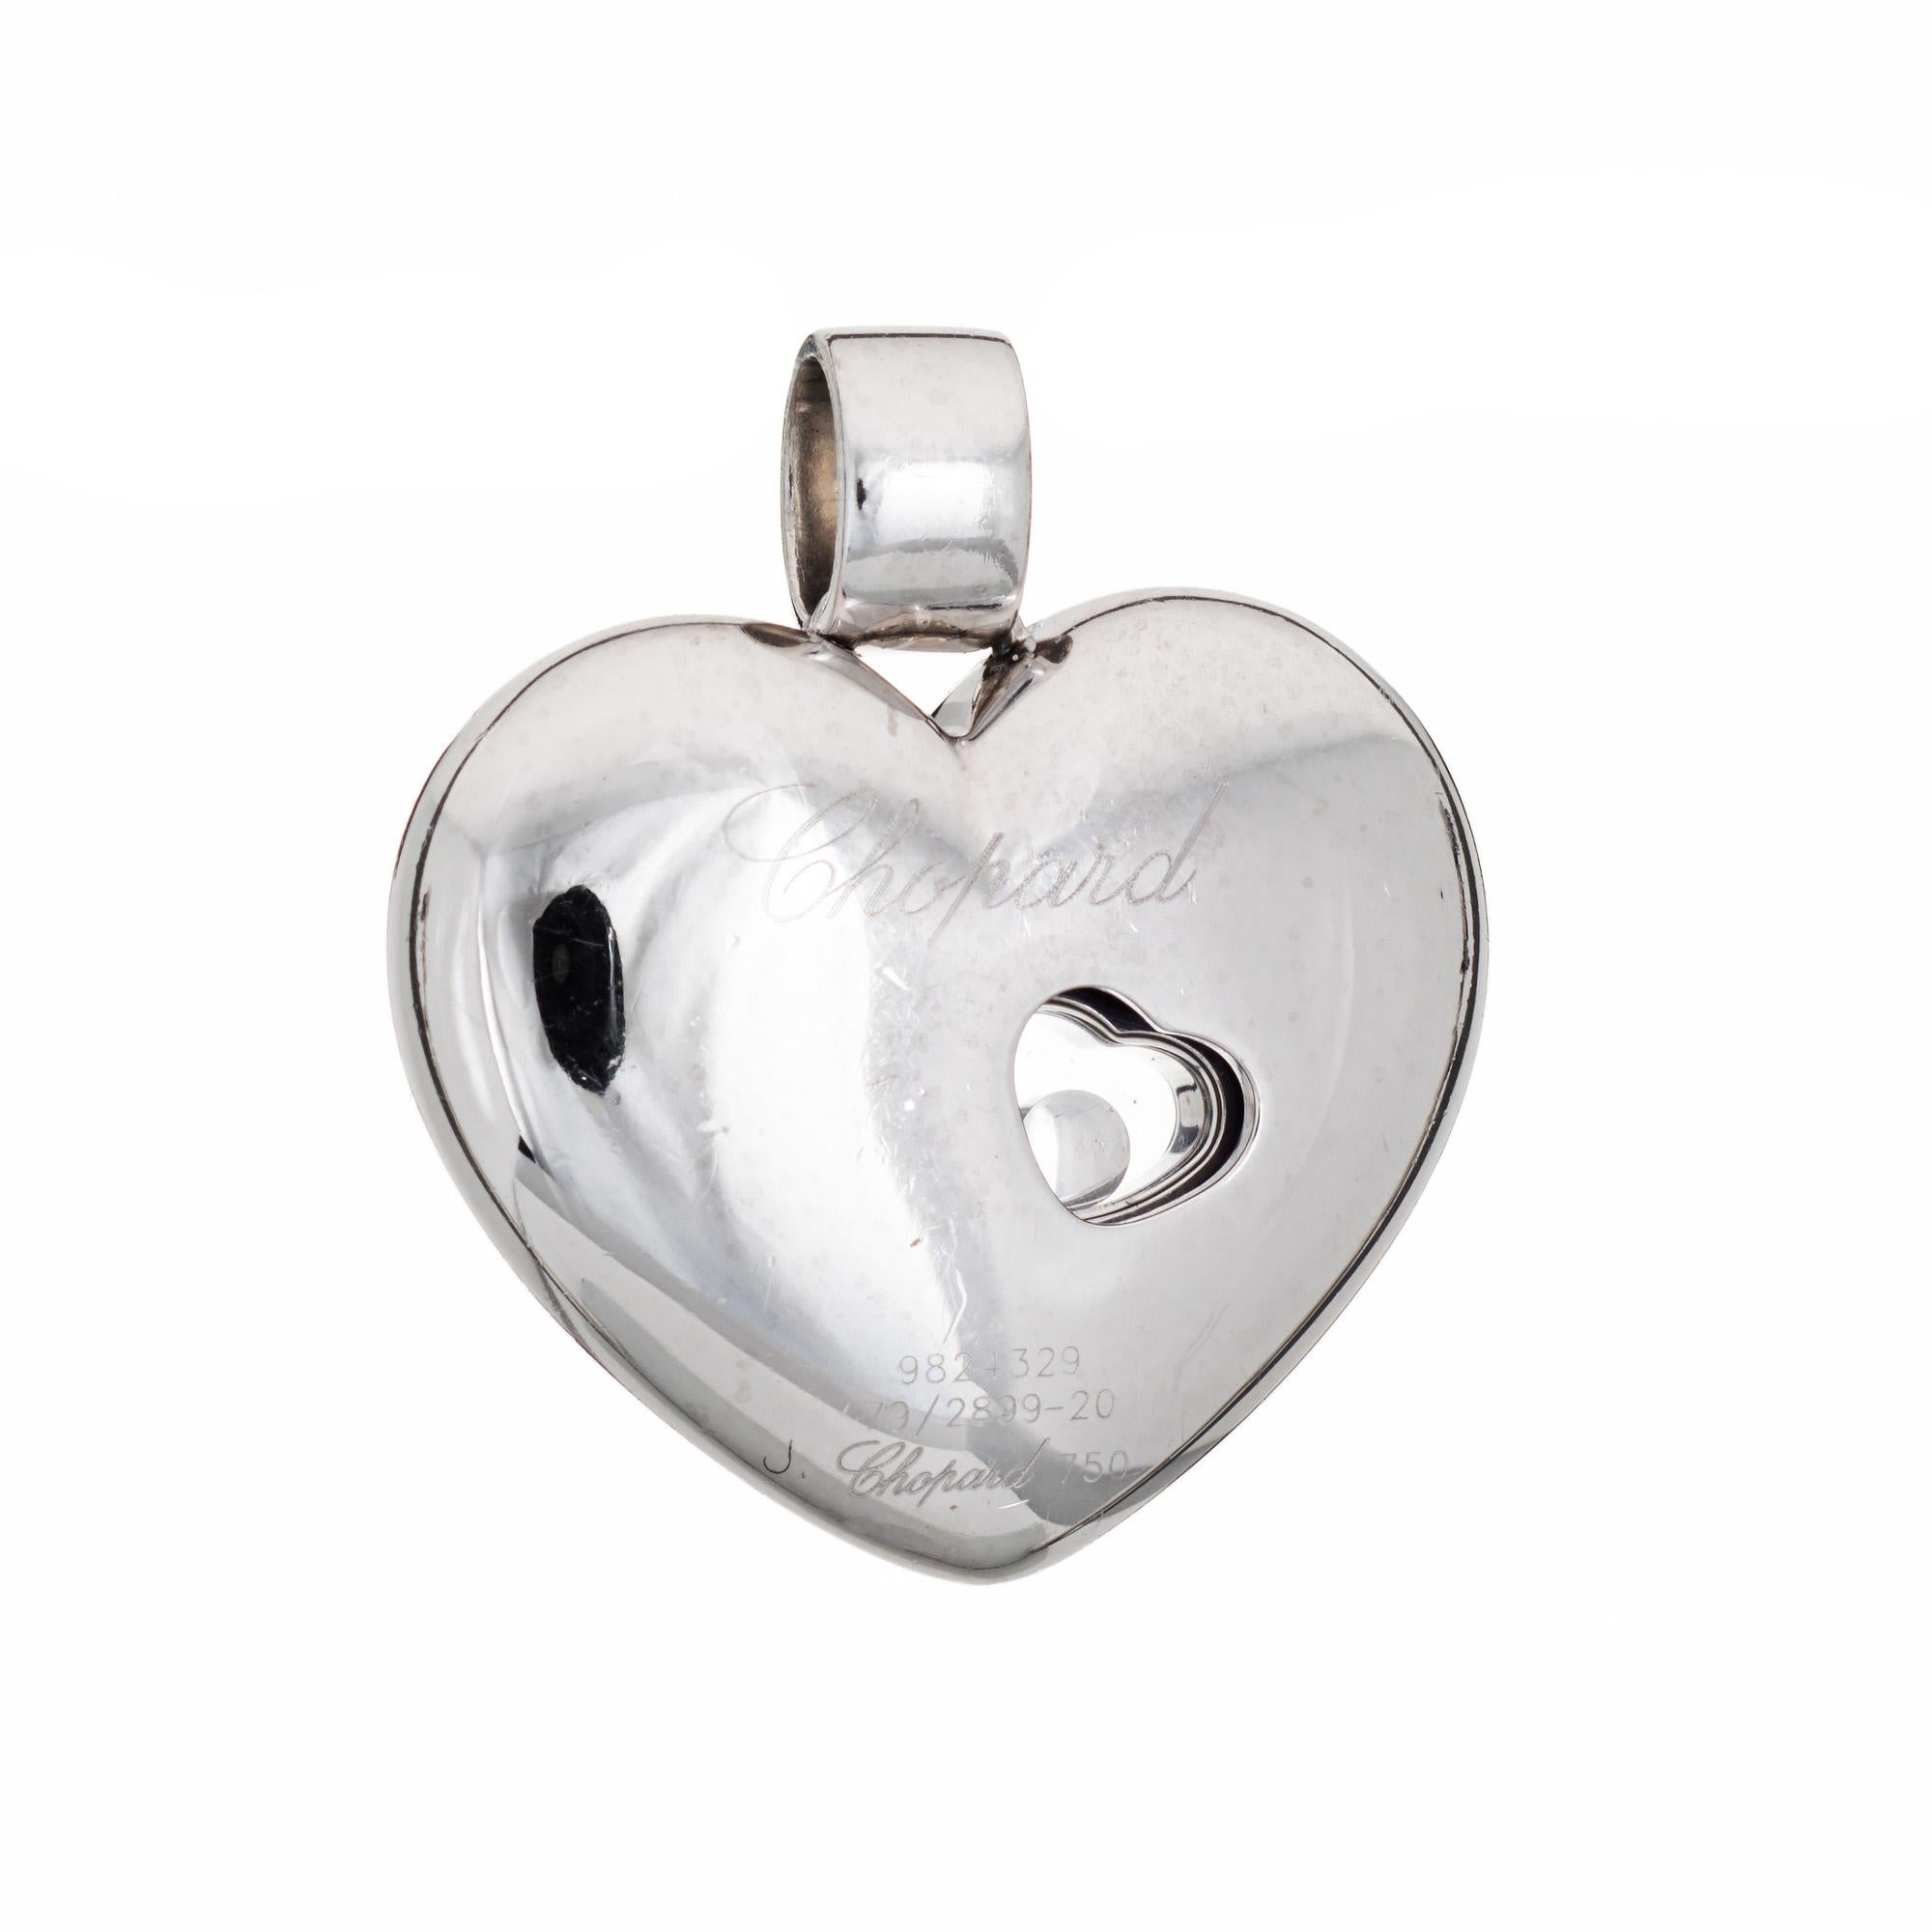 Pre-owned Chopard floating diamond heart pendant crafted in 18 karat white gold.  

Round brilliant cut diamonds total an estimated 0.25 carats (estimated at G-H color and VS2-SI1 clarity). 
From Chopard's Lucky Diamonds Collection the pendant